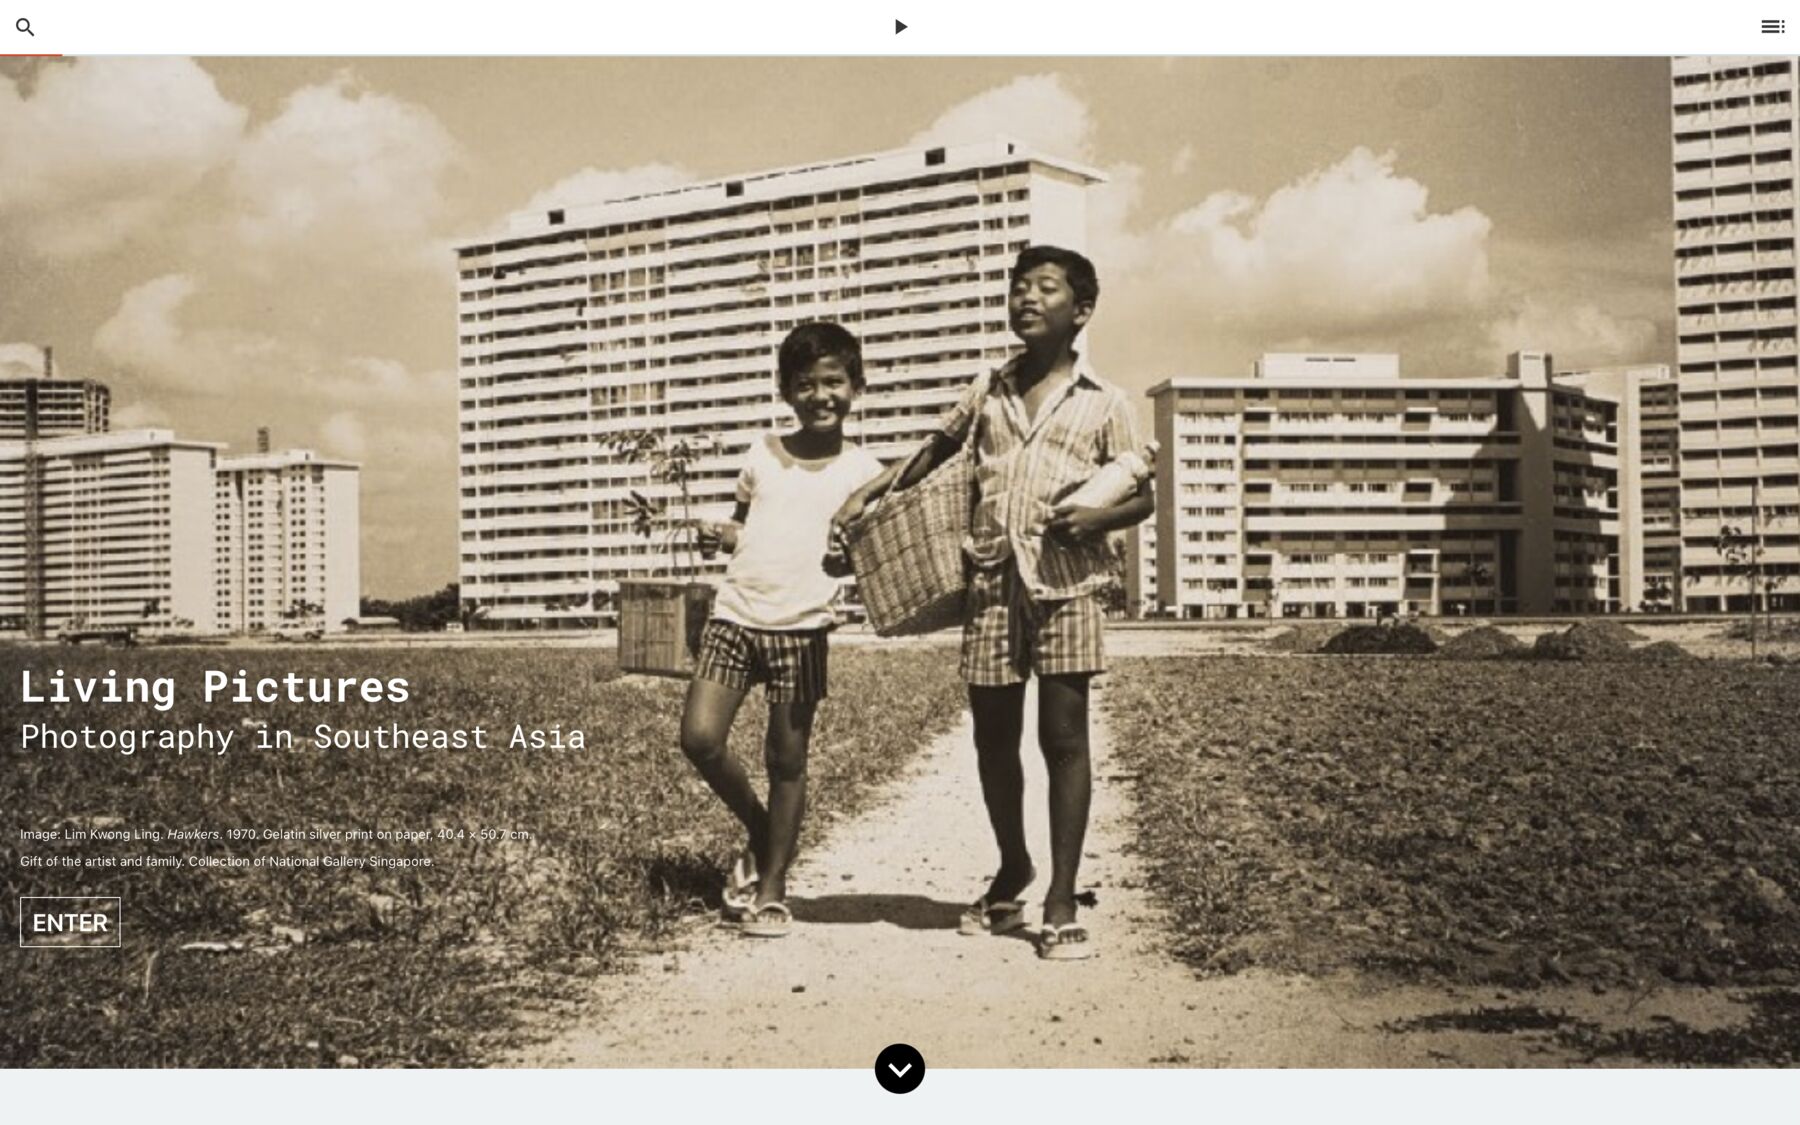 Living Pictures: Photography in Southeast Asia. Image: Lim Kwong Ling. Hawkers. 1970. Gelatin silver print on paper, 40.4 × 50.7 cm. Gift of the artist and family. Collection of National Gallery Singapore.